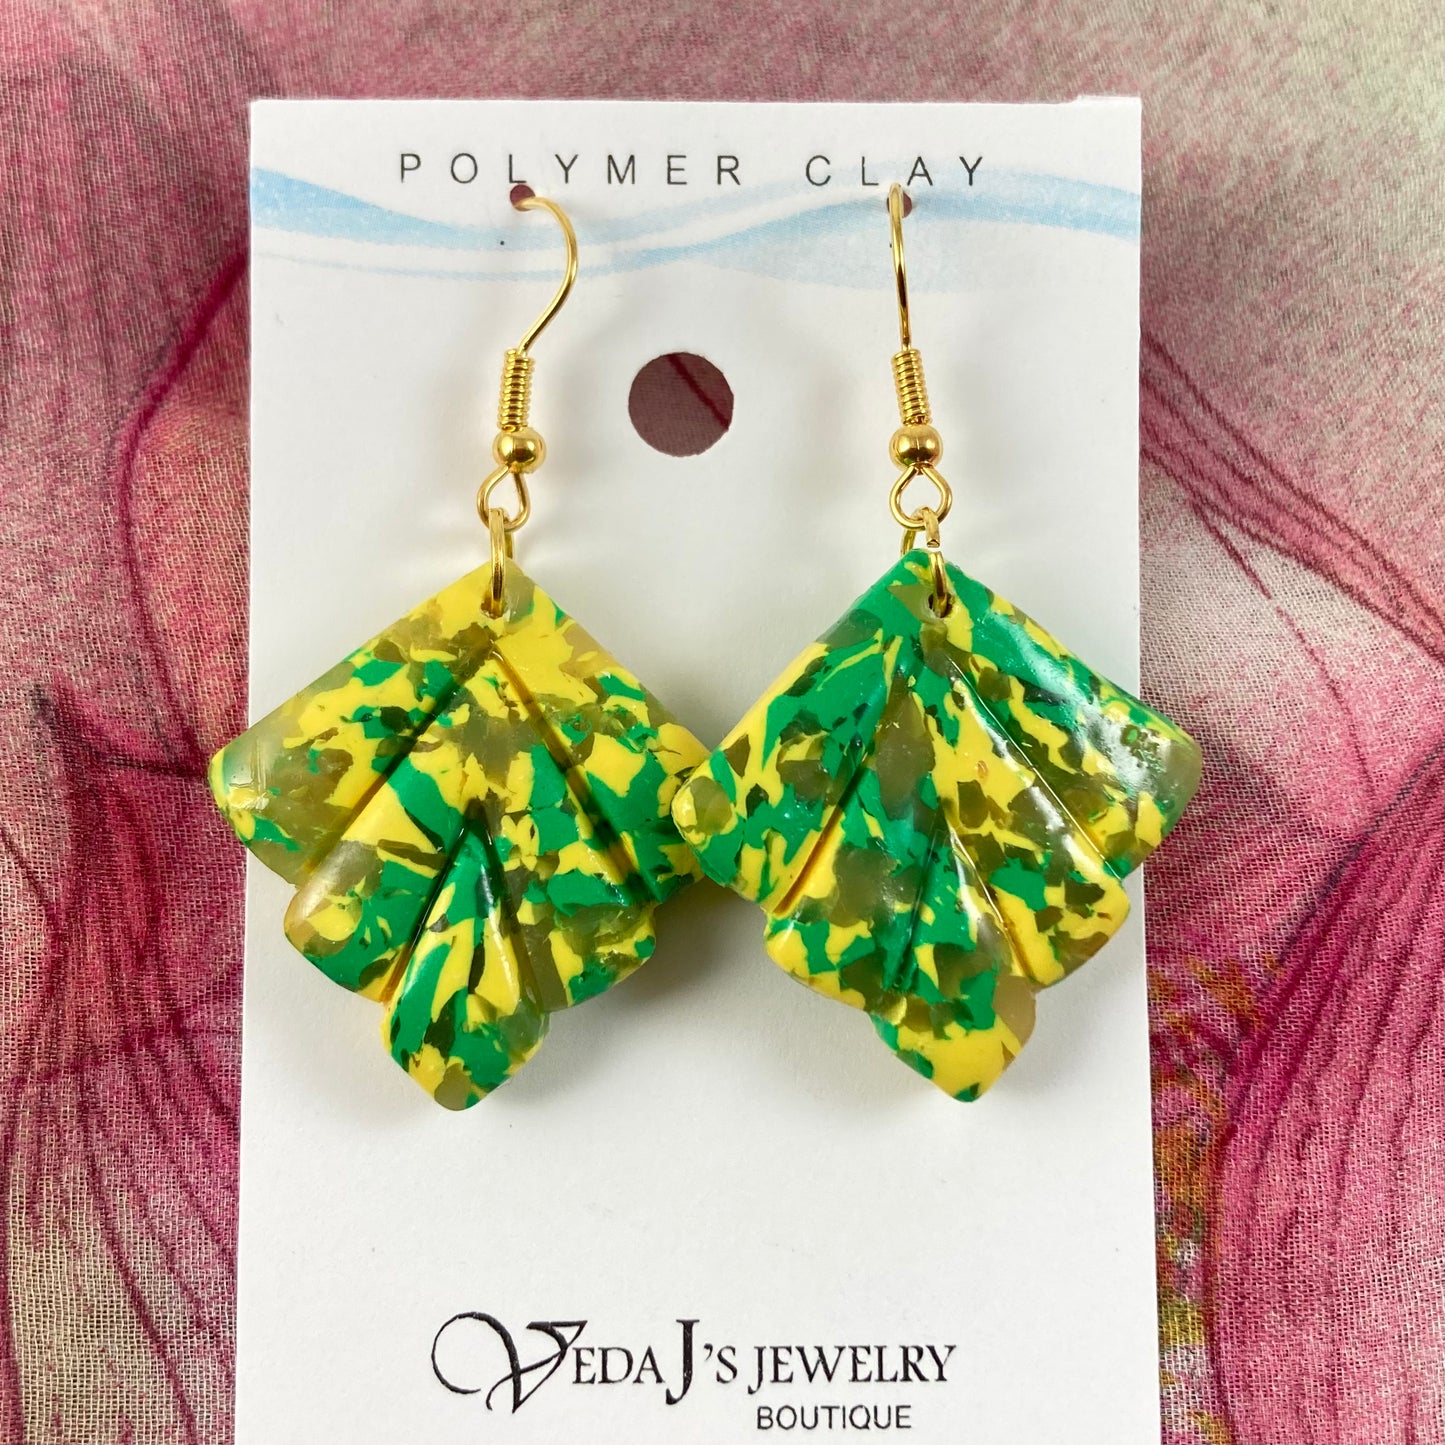 PLYCL-10 - Green & Yellow Translucent Marbled Earrings